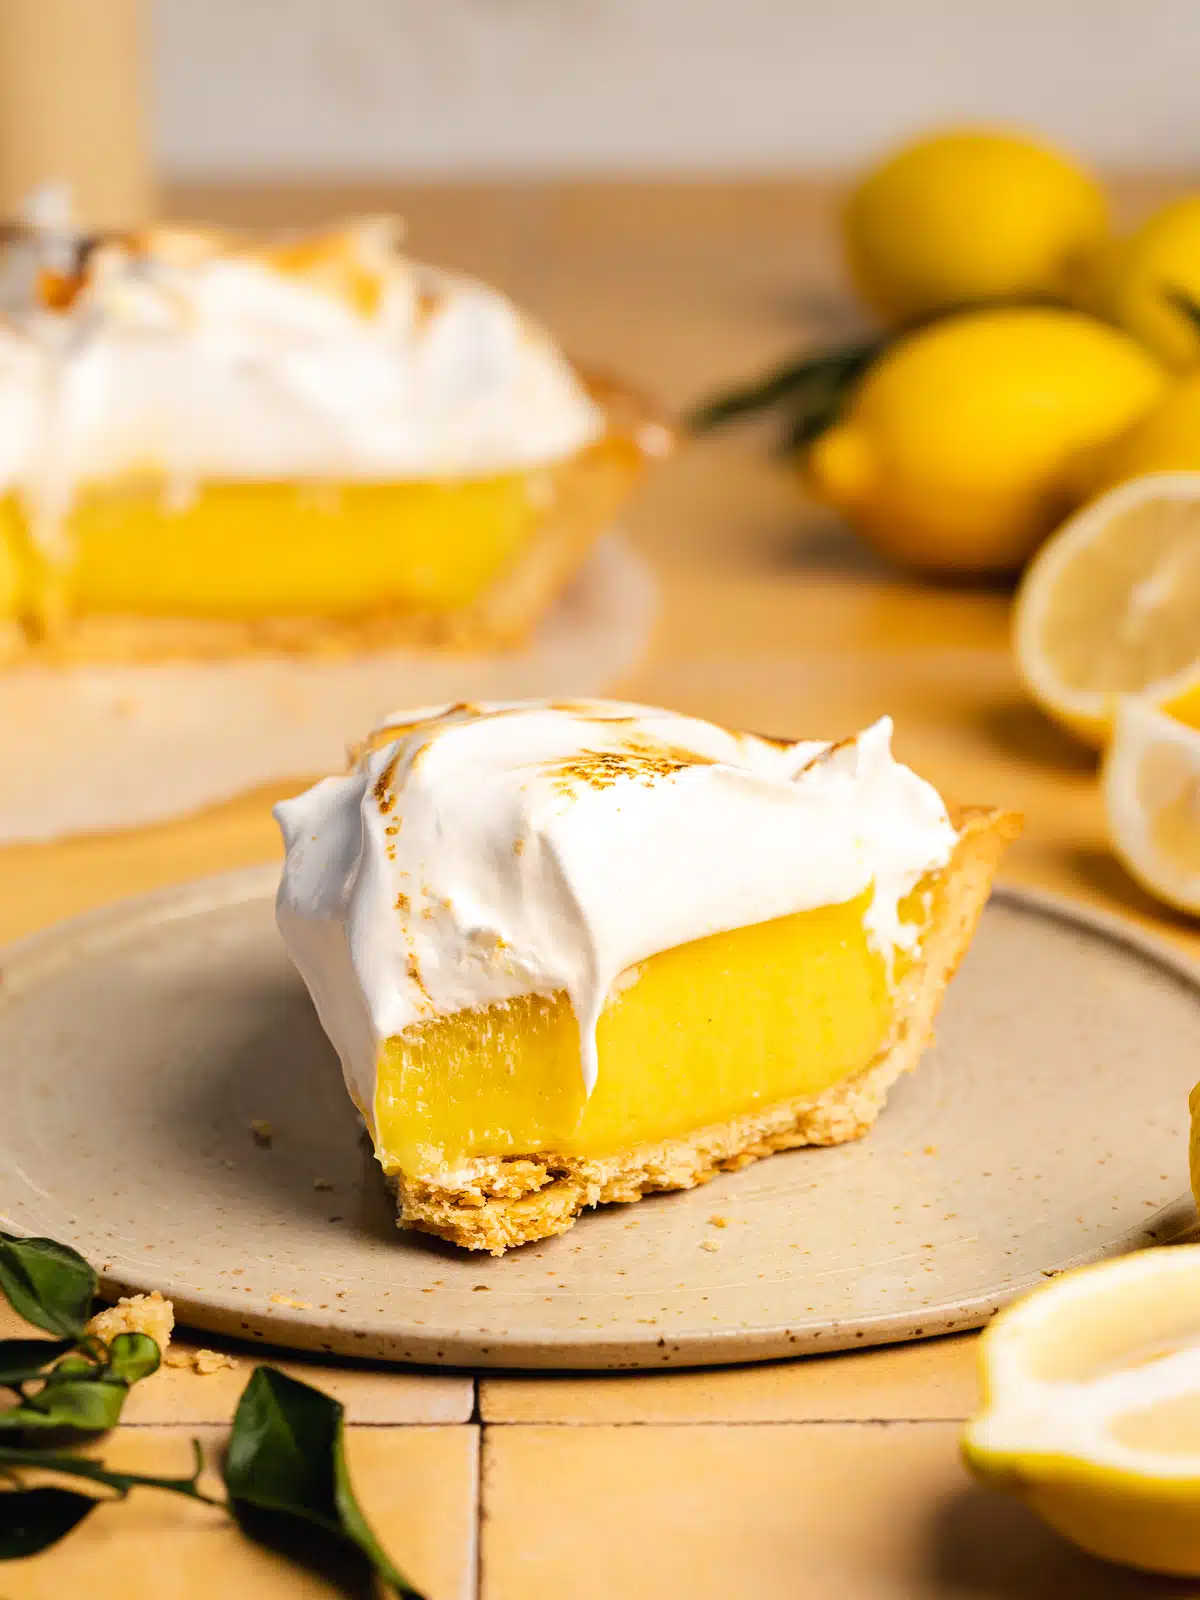 a slice of vegan lemon meringue pie on a ceramic plate with a spoonful taken from it showing the smooth and creamy consistency.